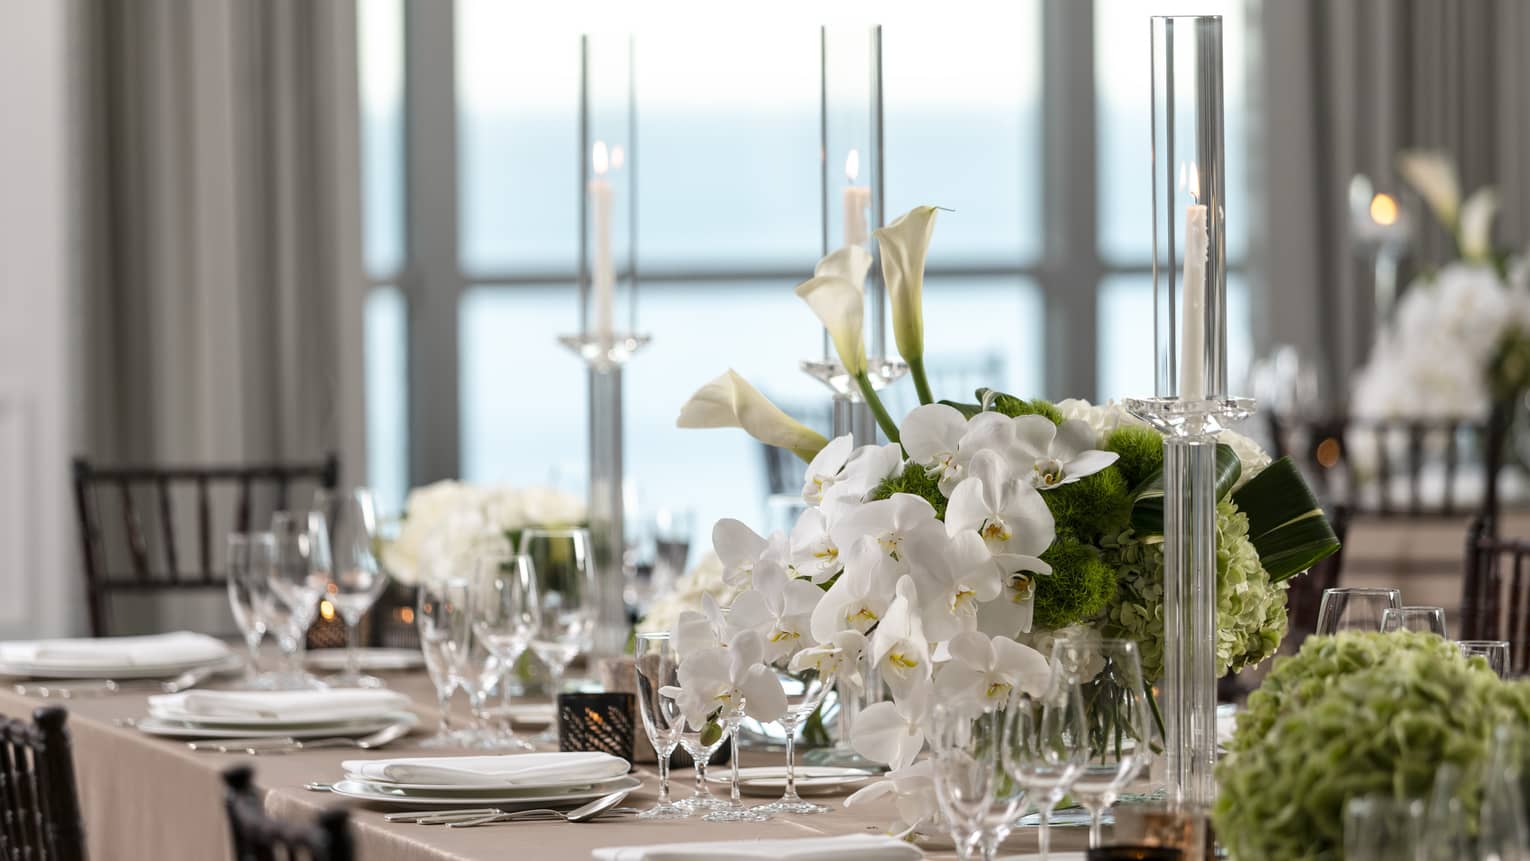 Part of formally set dining table with white orchids and tall crystal candlesticks